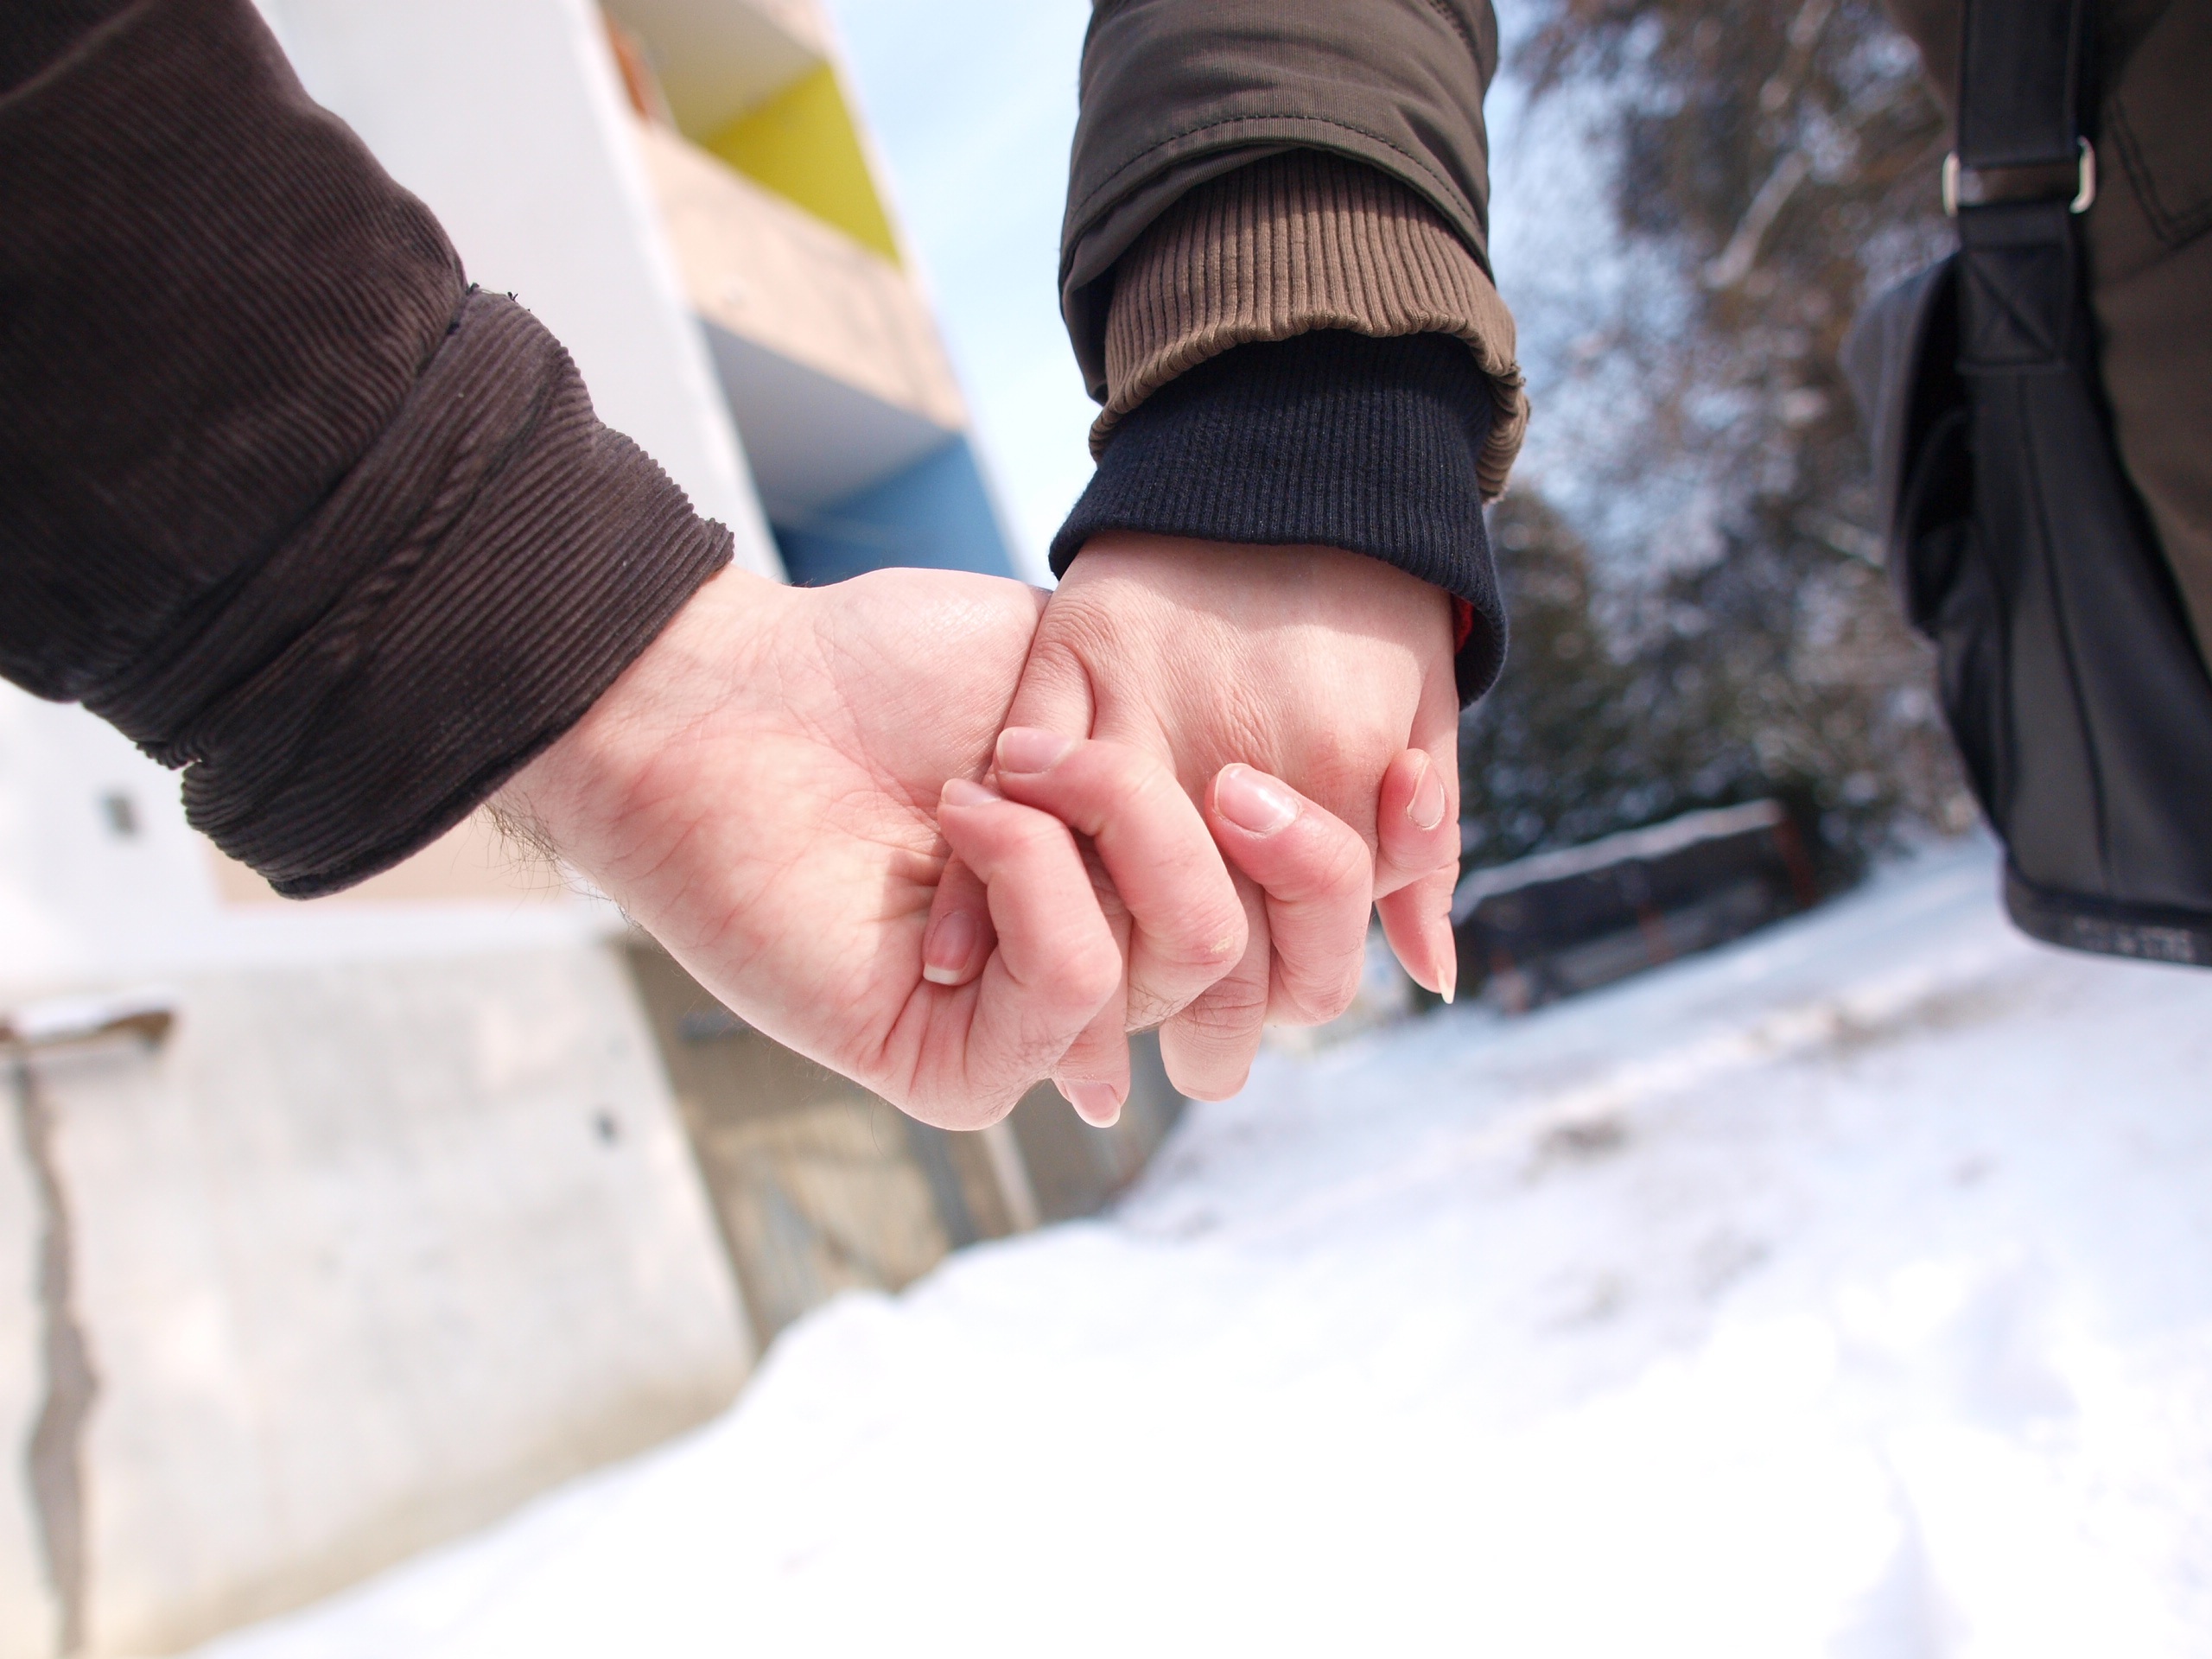 Free Image, hand, man, person, white, male, finger, romance, romantic, together, holding hands, boyfriend, girlfriend, relationship, couple in love, interaction, sense, happy couples 2560x1920